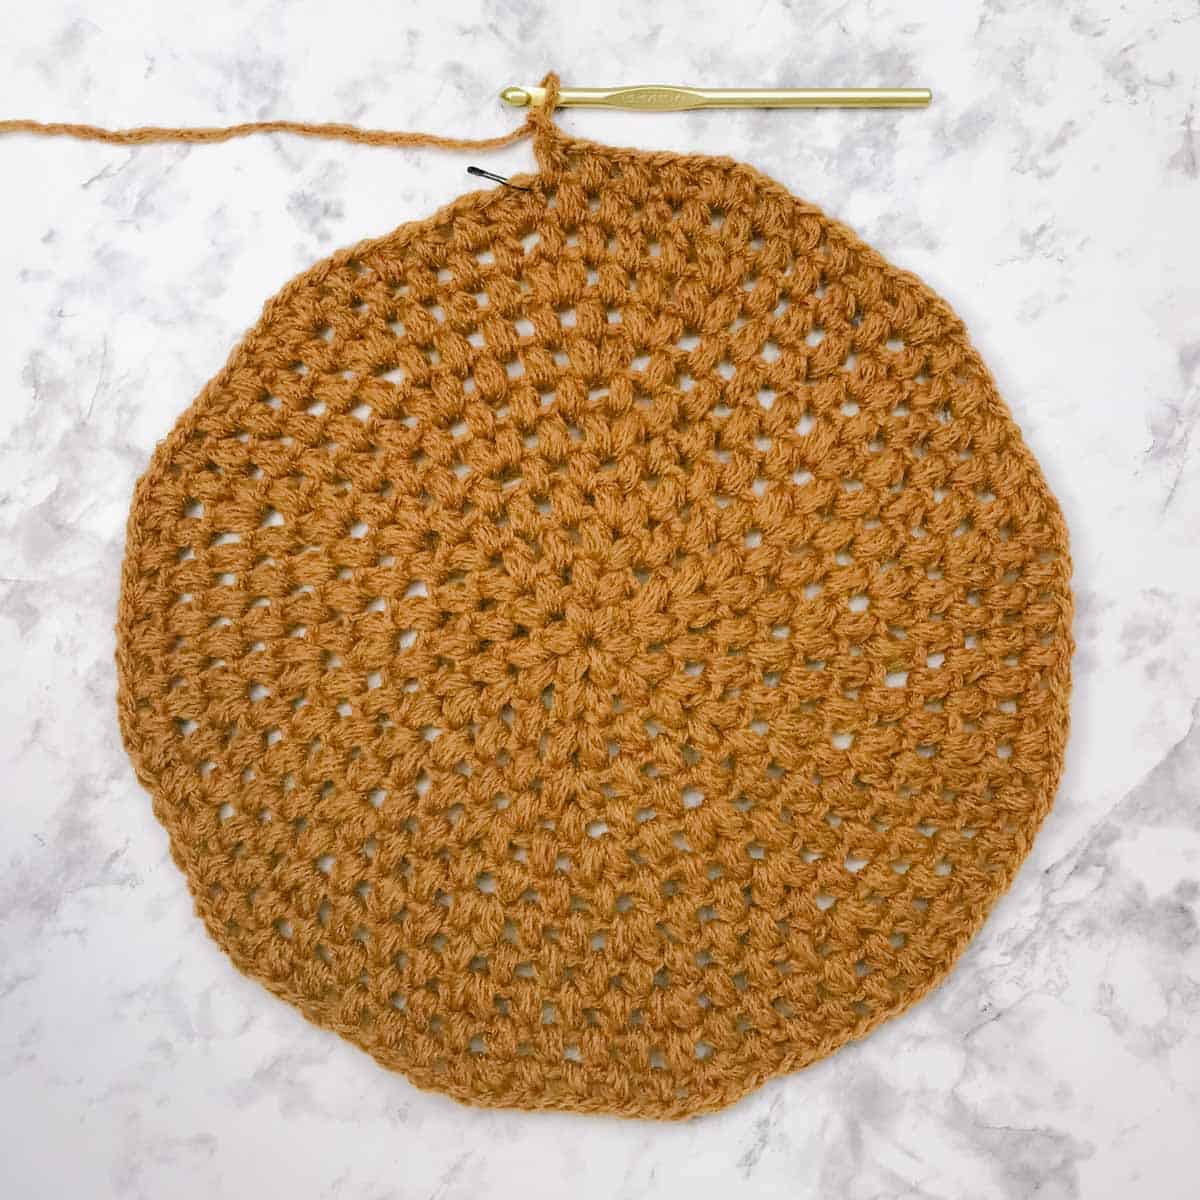 An in-progress crochet beret pattern with a hook and stitch marker.